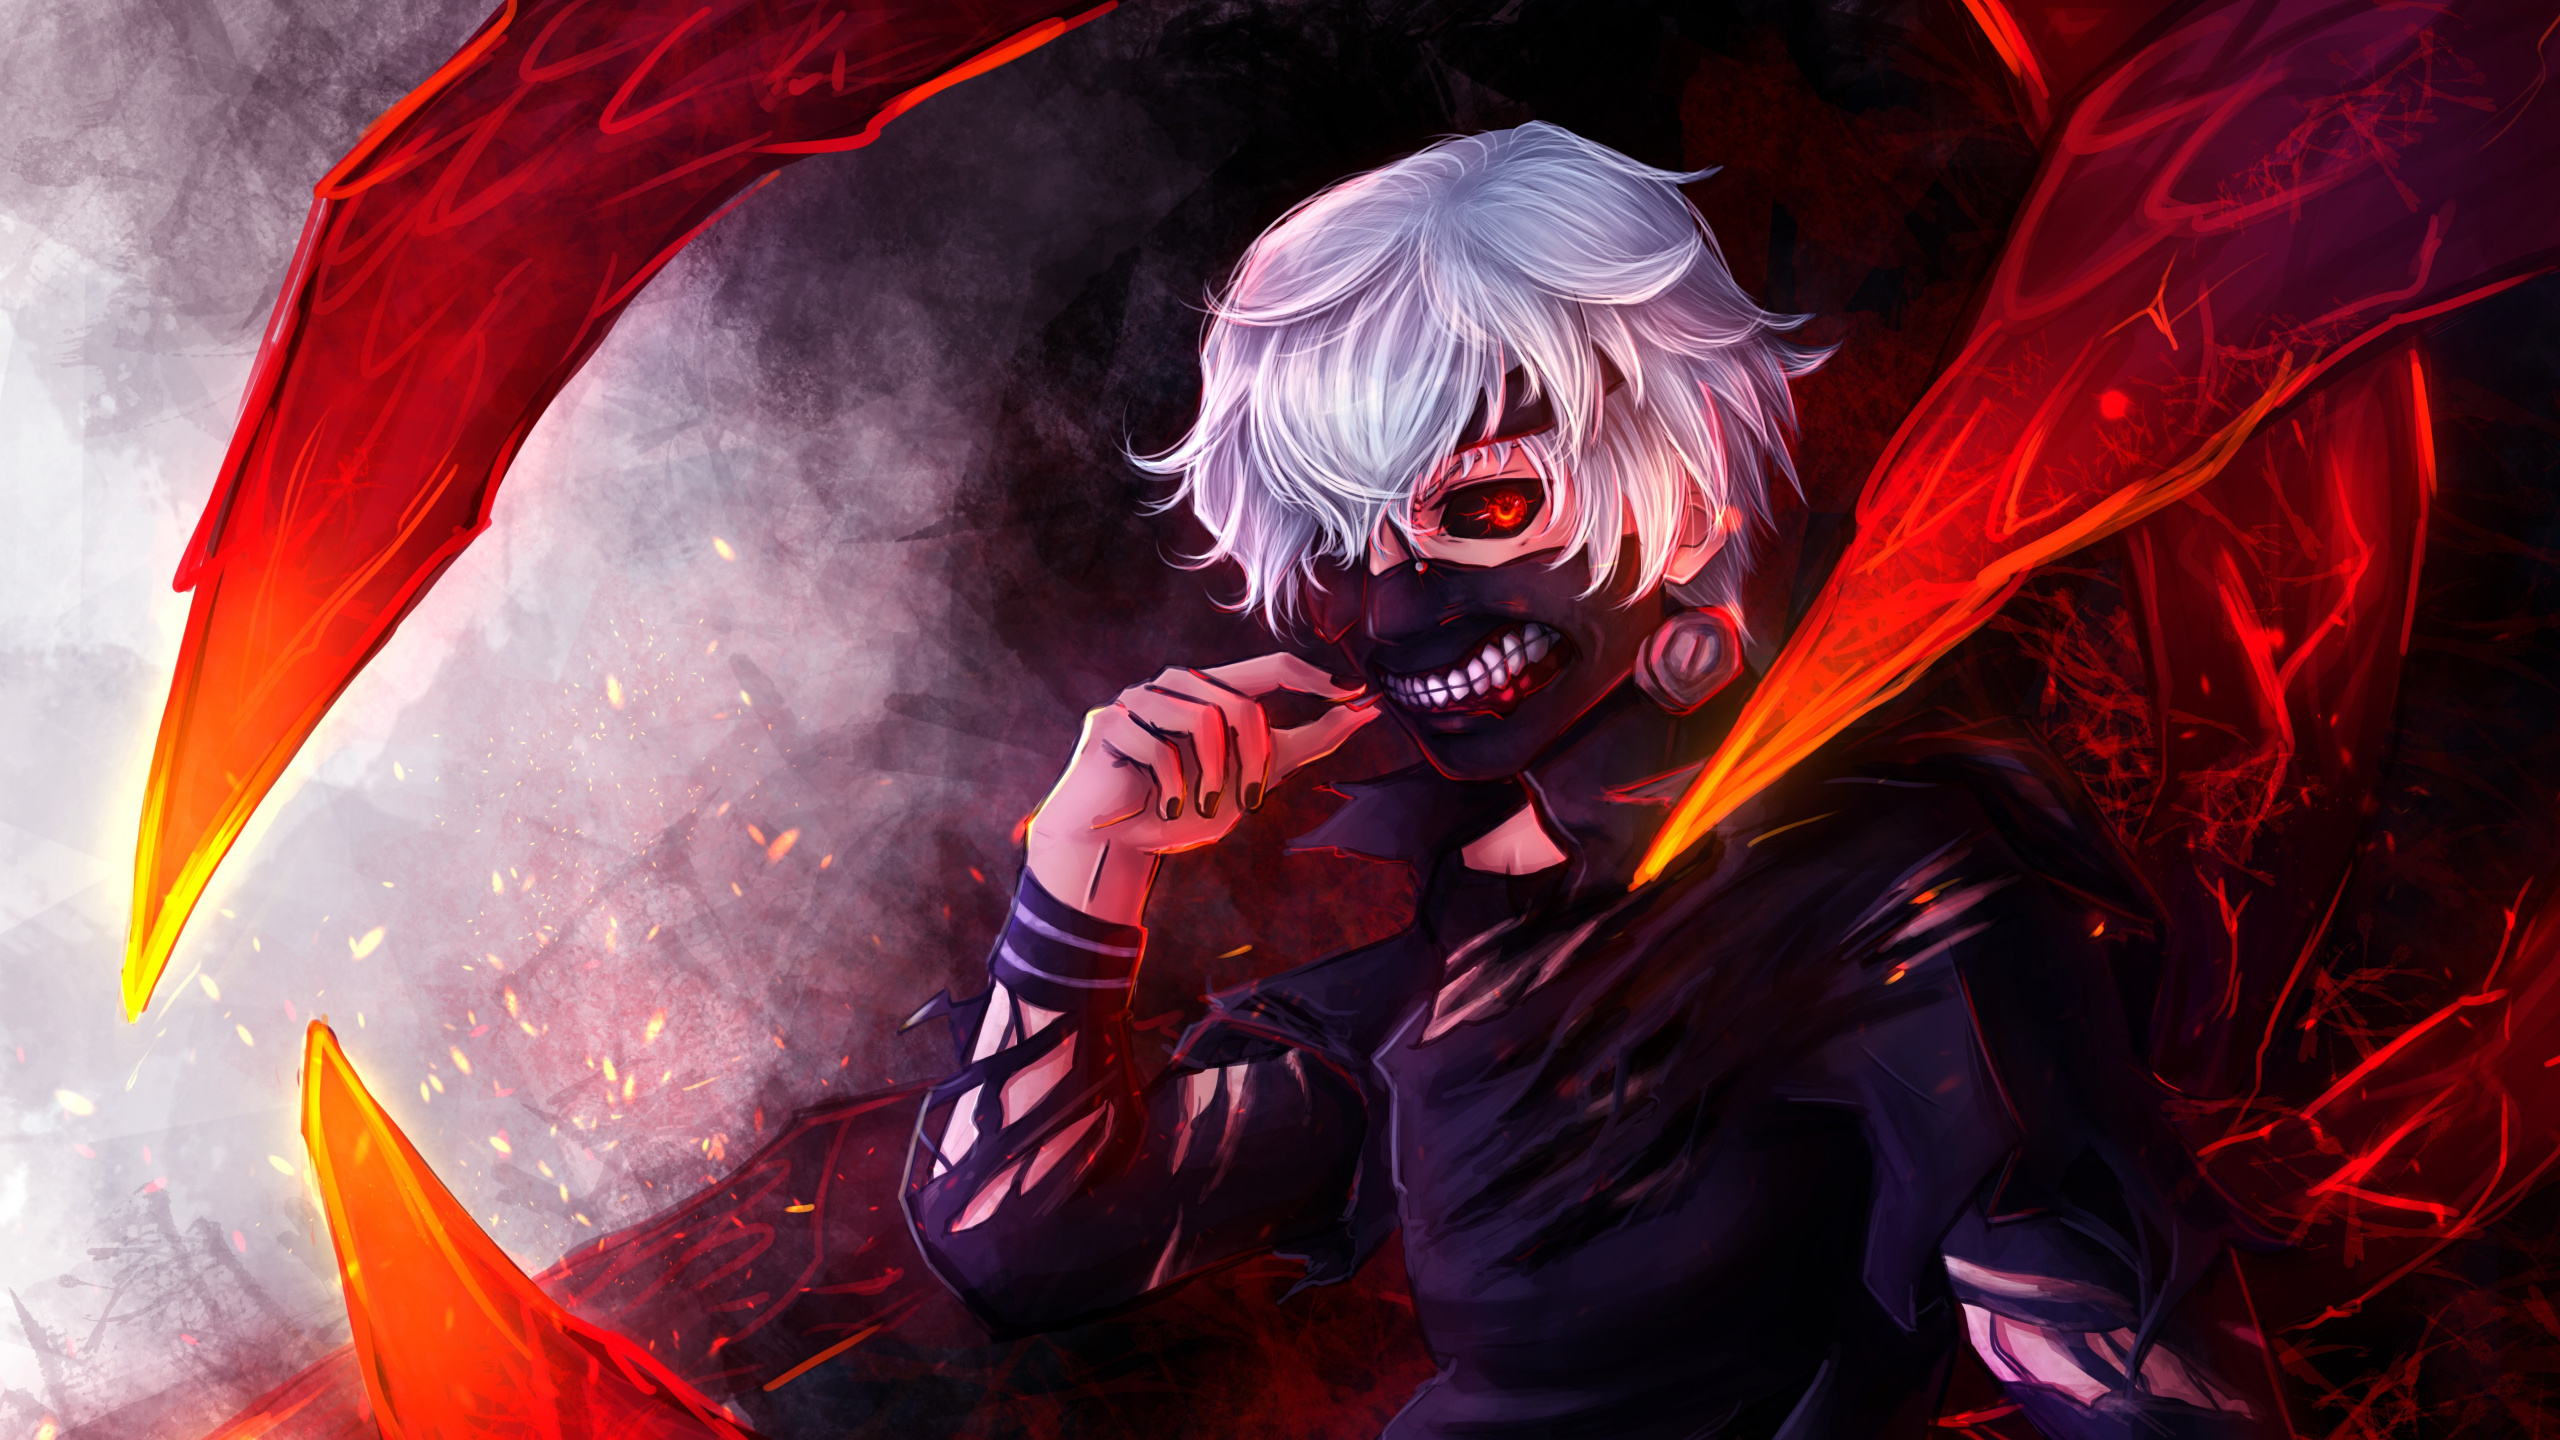 Man in Black and Red Suit Anime Character. Wallpaper in 2560x1440 Resolution